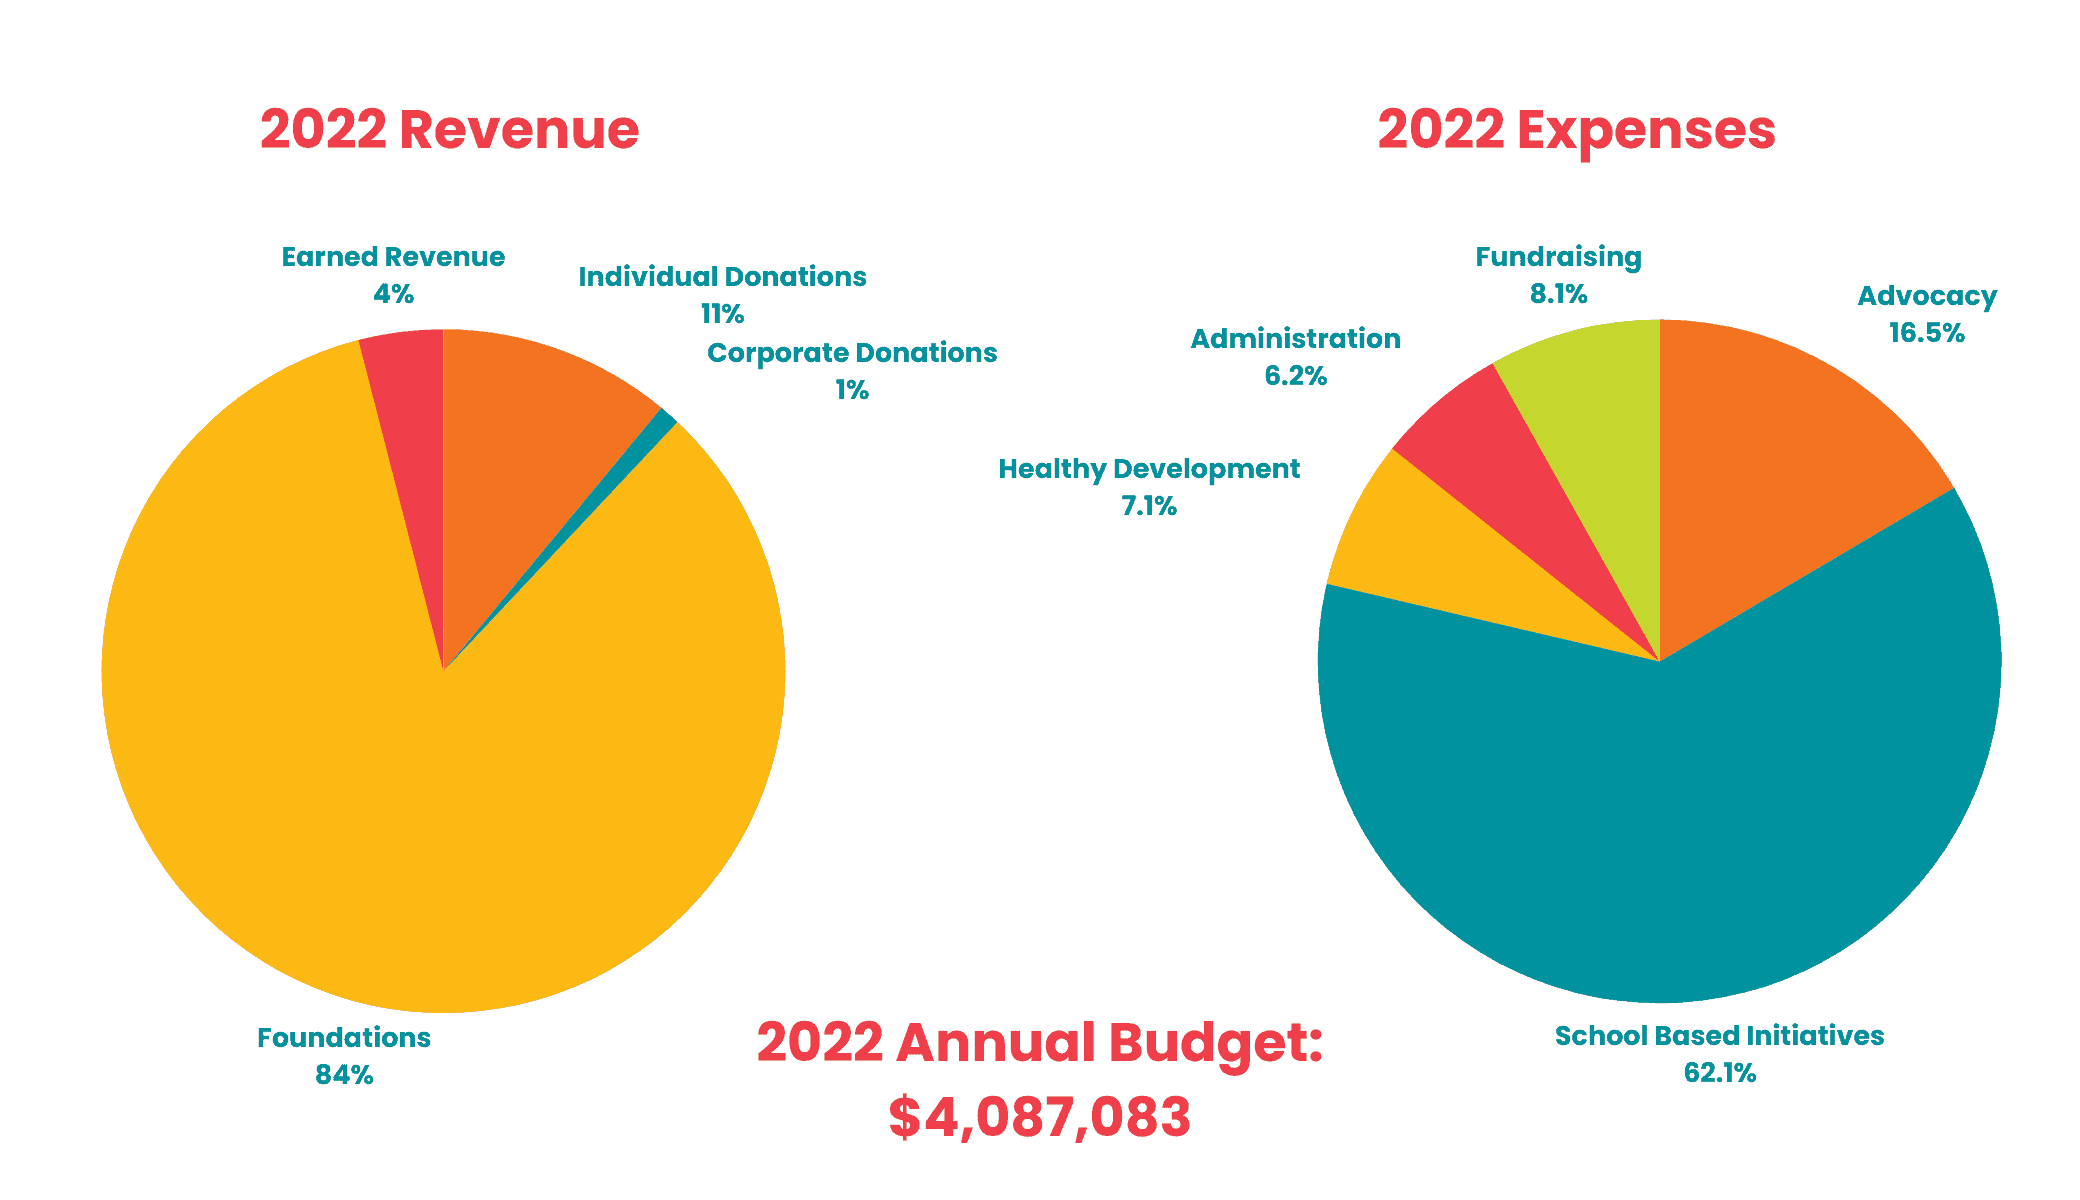 This is an image of two pie charts, which shows Children's Institute's 2022 revenue and expenses. The pie charts are side by side. The chart with 2022 revenue shows the following: 11 percent was from individual donations, 1 percent was from corporate donations, 84 percent was from foundations, and 4 percent was from earned revenue. The expenses chart shows that 62.1 percent of expenses were from school based initiatives, 16.5 percent was from advocacy, 8.1 percent was from fundraising, and 6.2 percent was from 6.2 percent. The total revenue for 2022 was $4,087,083. 